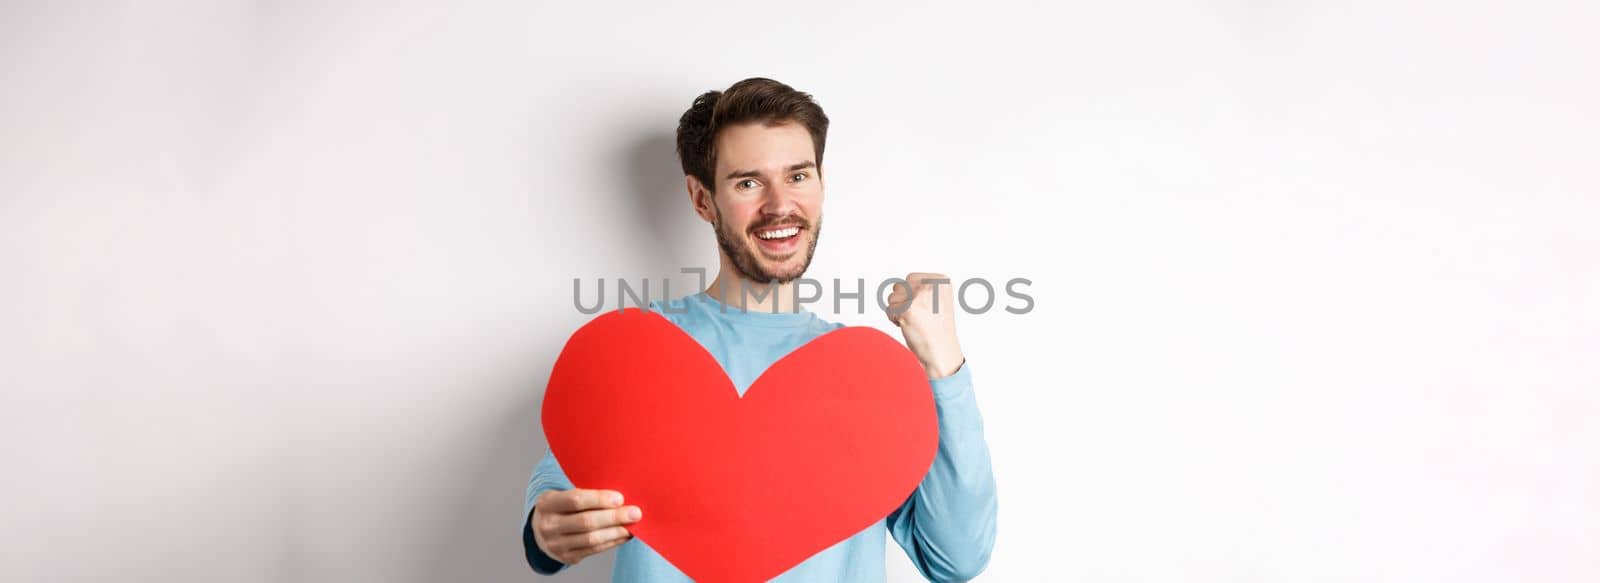 Valentines day. Happy boyfriend triumphing, saying yes and showing valentine red heart, smiling as winning girls love, standing over white background.